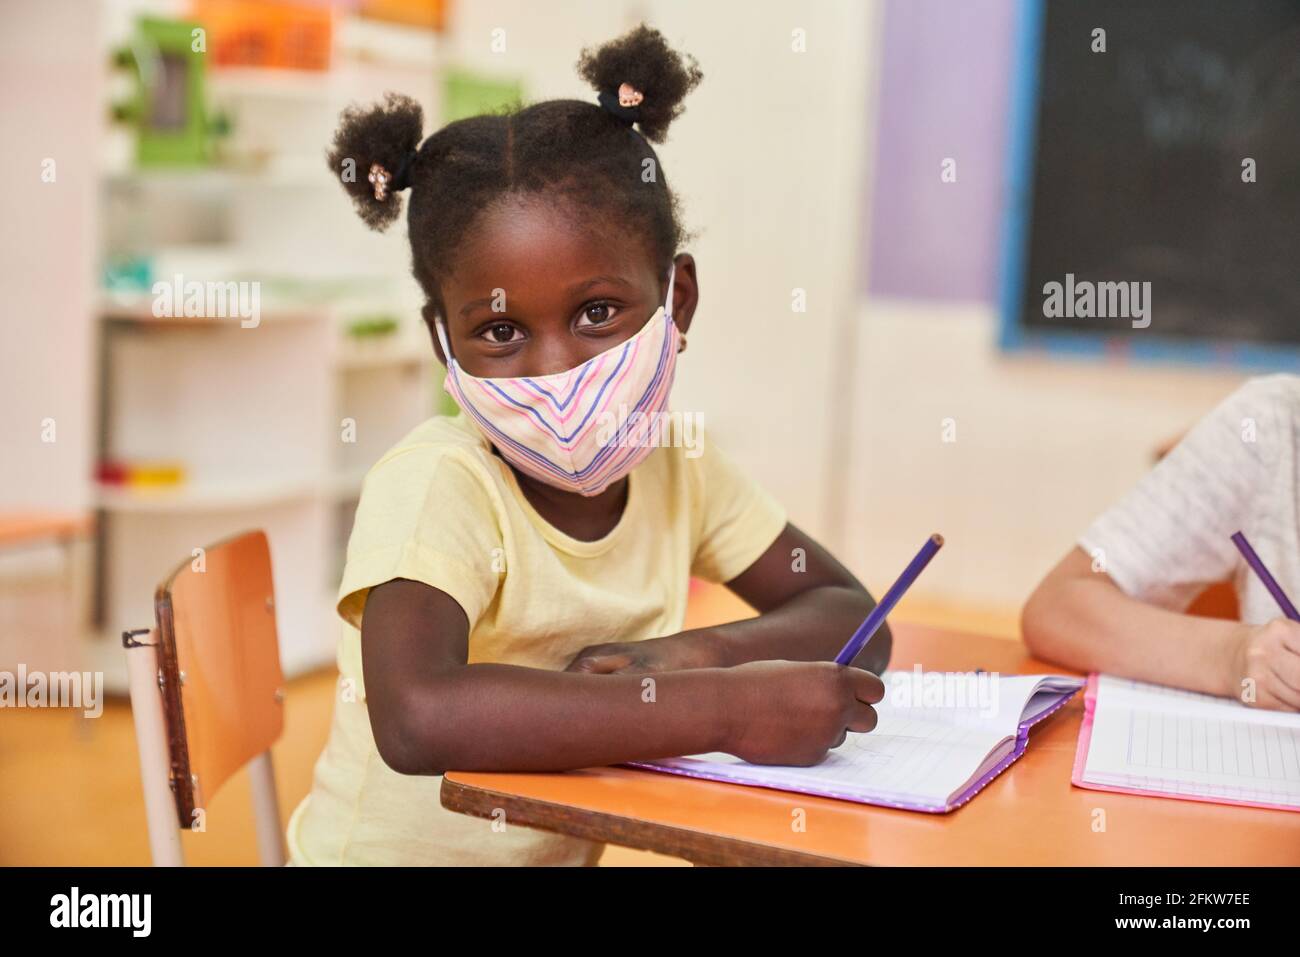 African girl with protective mask because of Covid-19 in preschool or elementary school Stock Photo